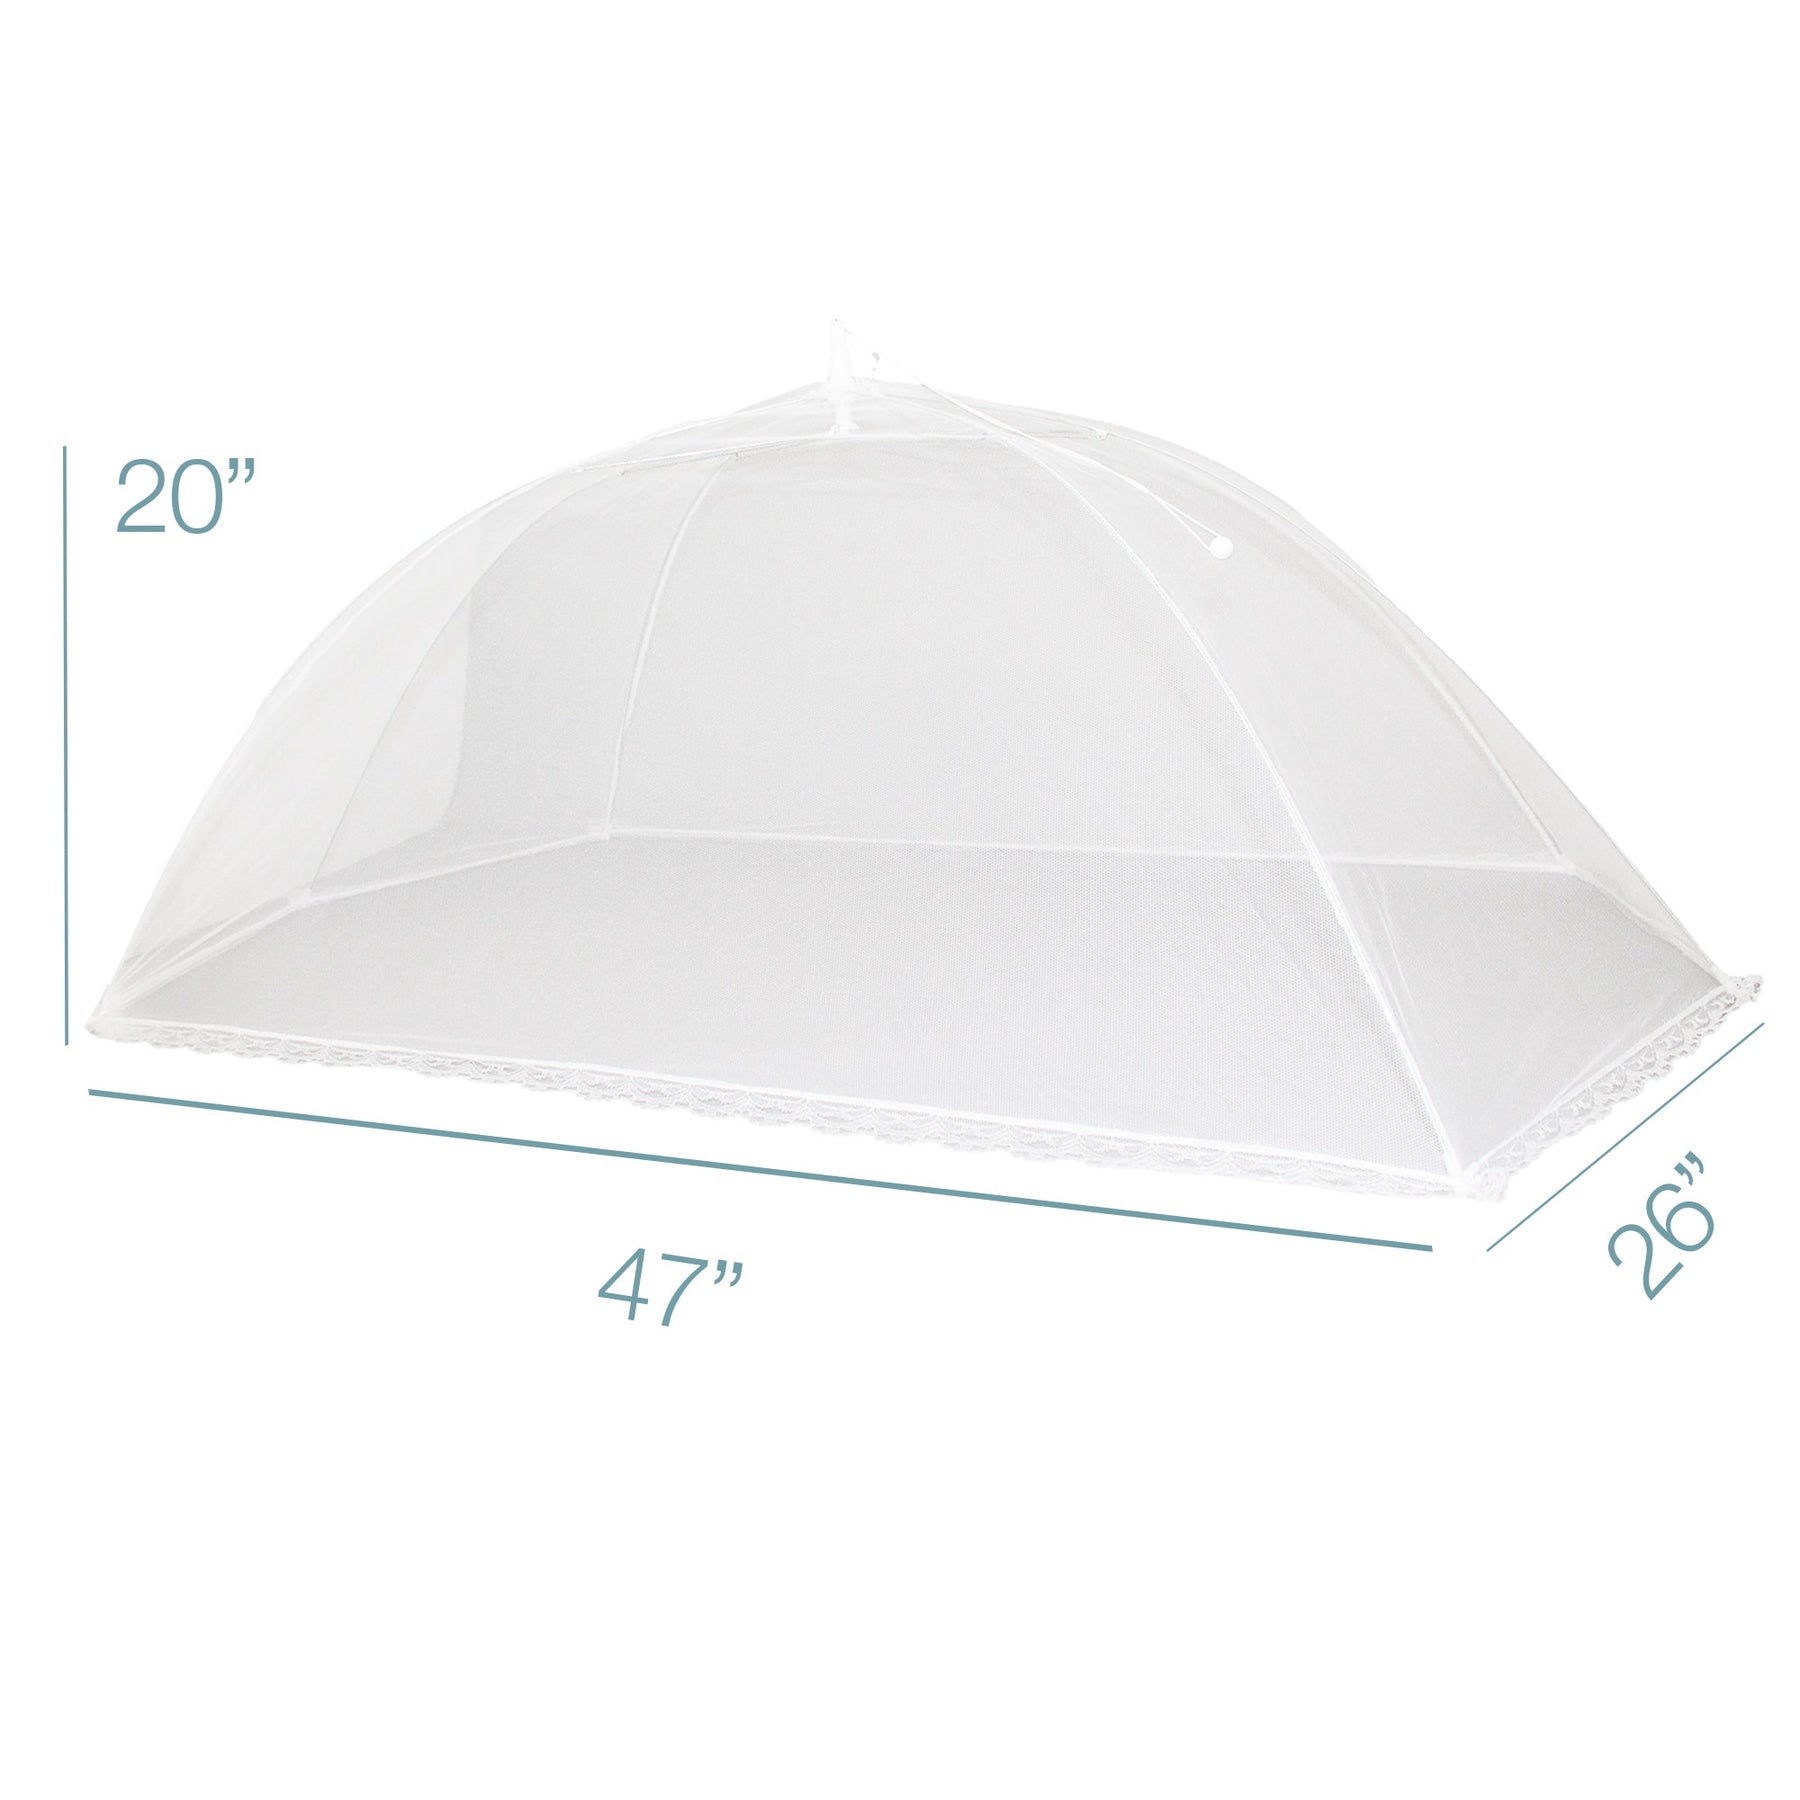 6pk Pop-Up 47x26 Jumbo Outdoor Food Tent Covers - Keep Bugs Out